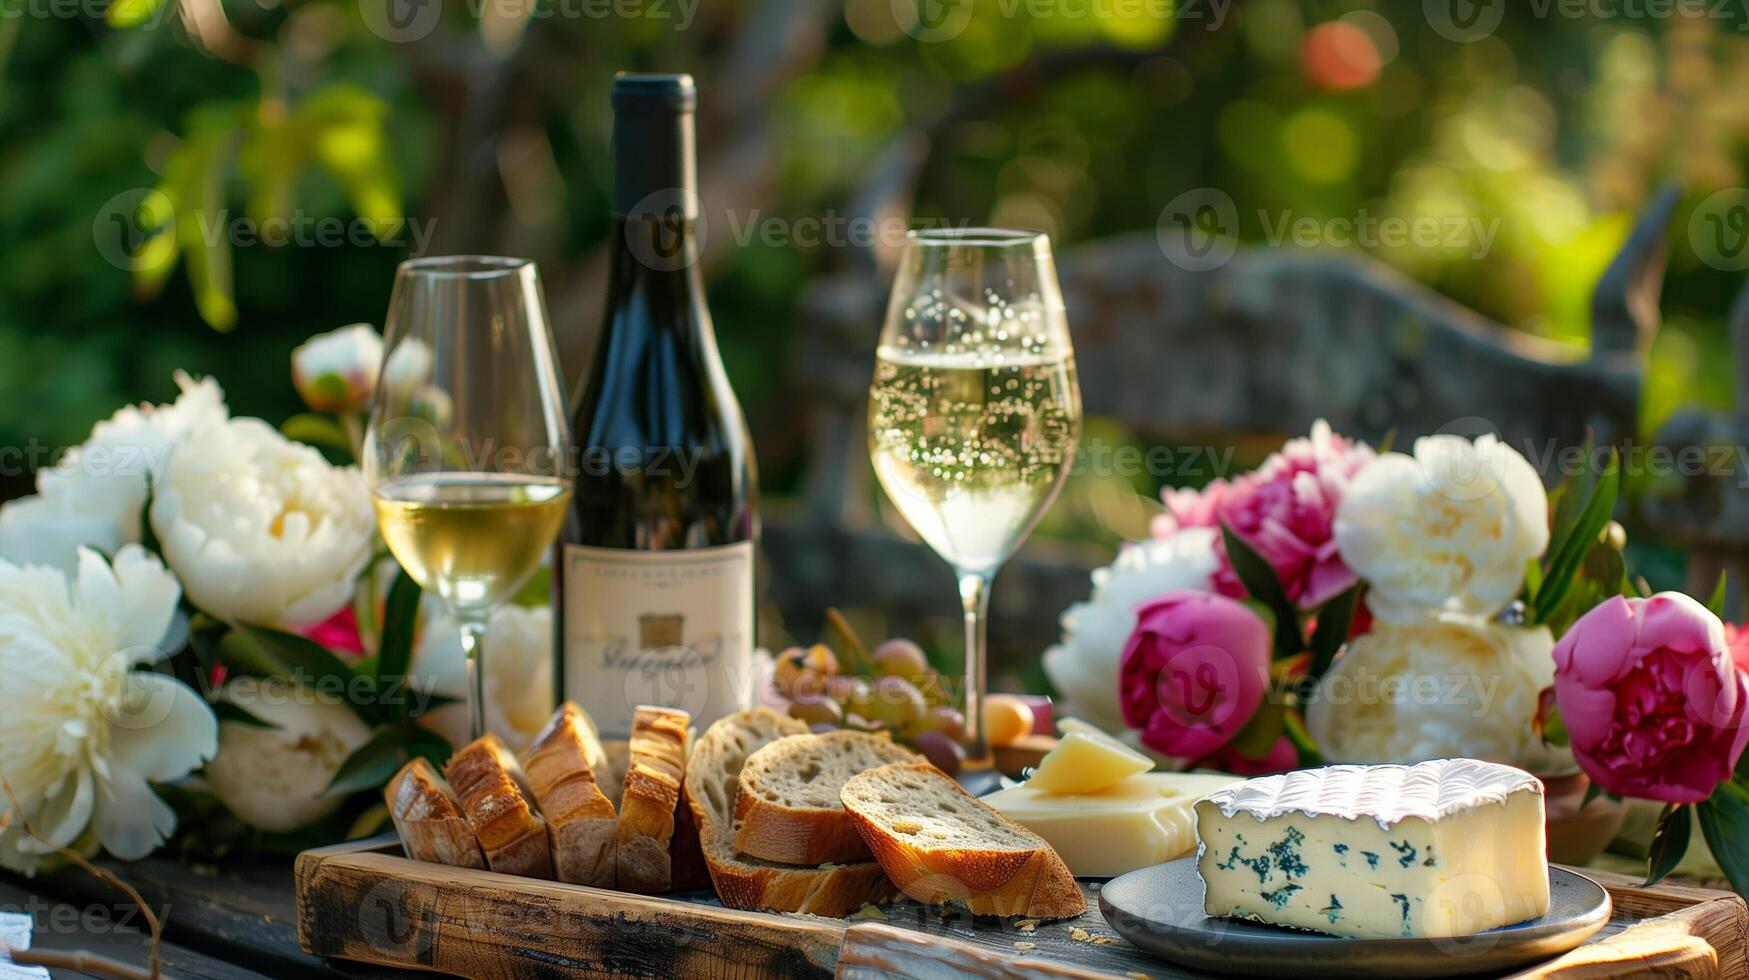 Perfect photo, stock style photo Peaceful outdoor meal in a fragrant peony garden, with wine, bread, and cheese on a rustic wooden tray